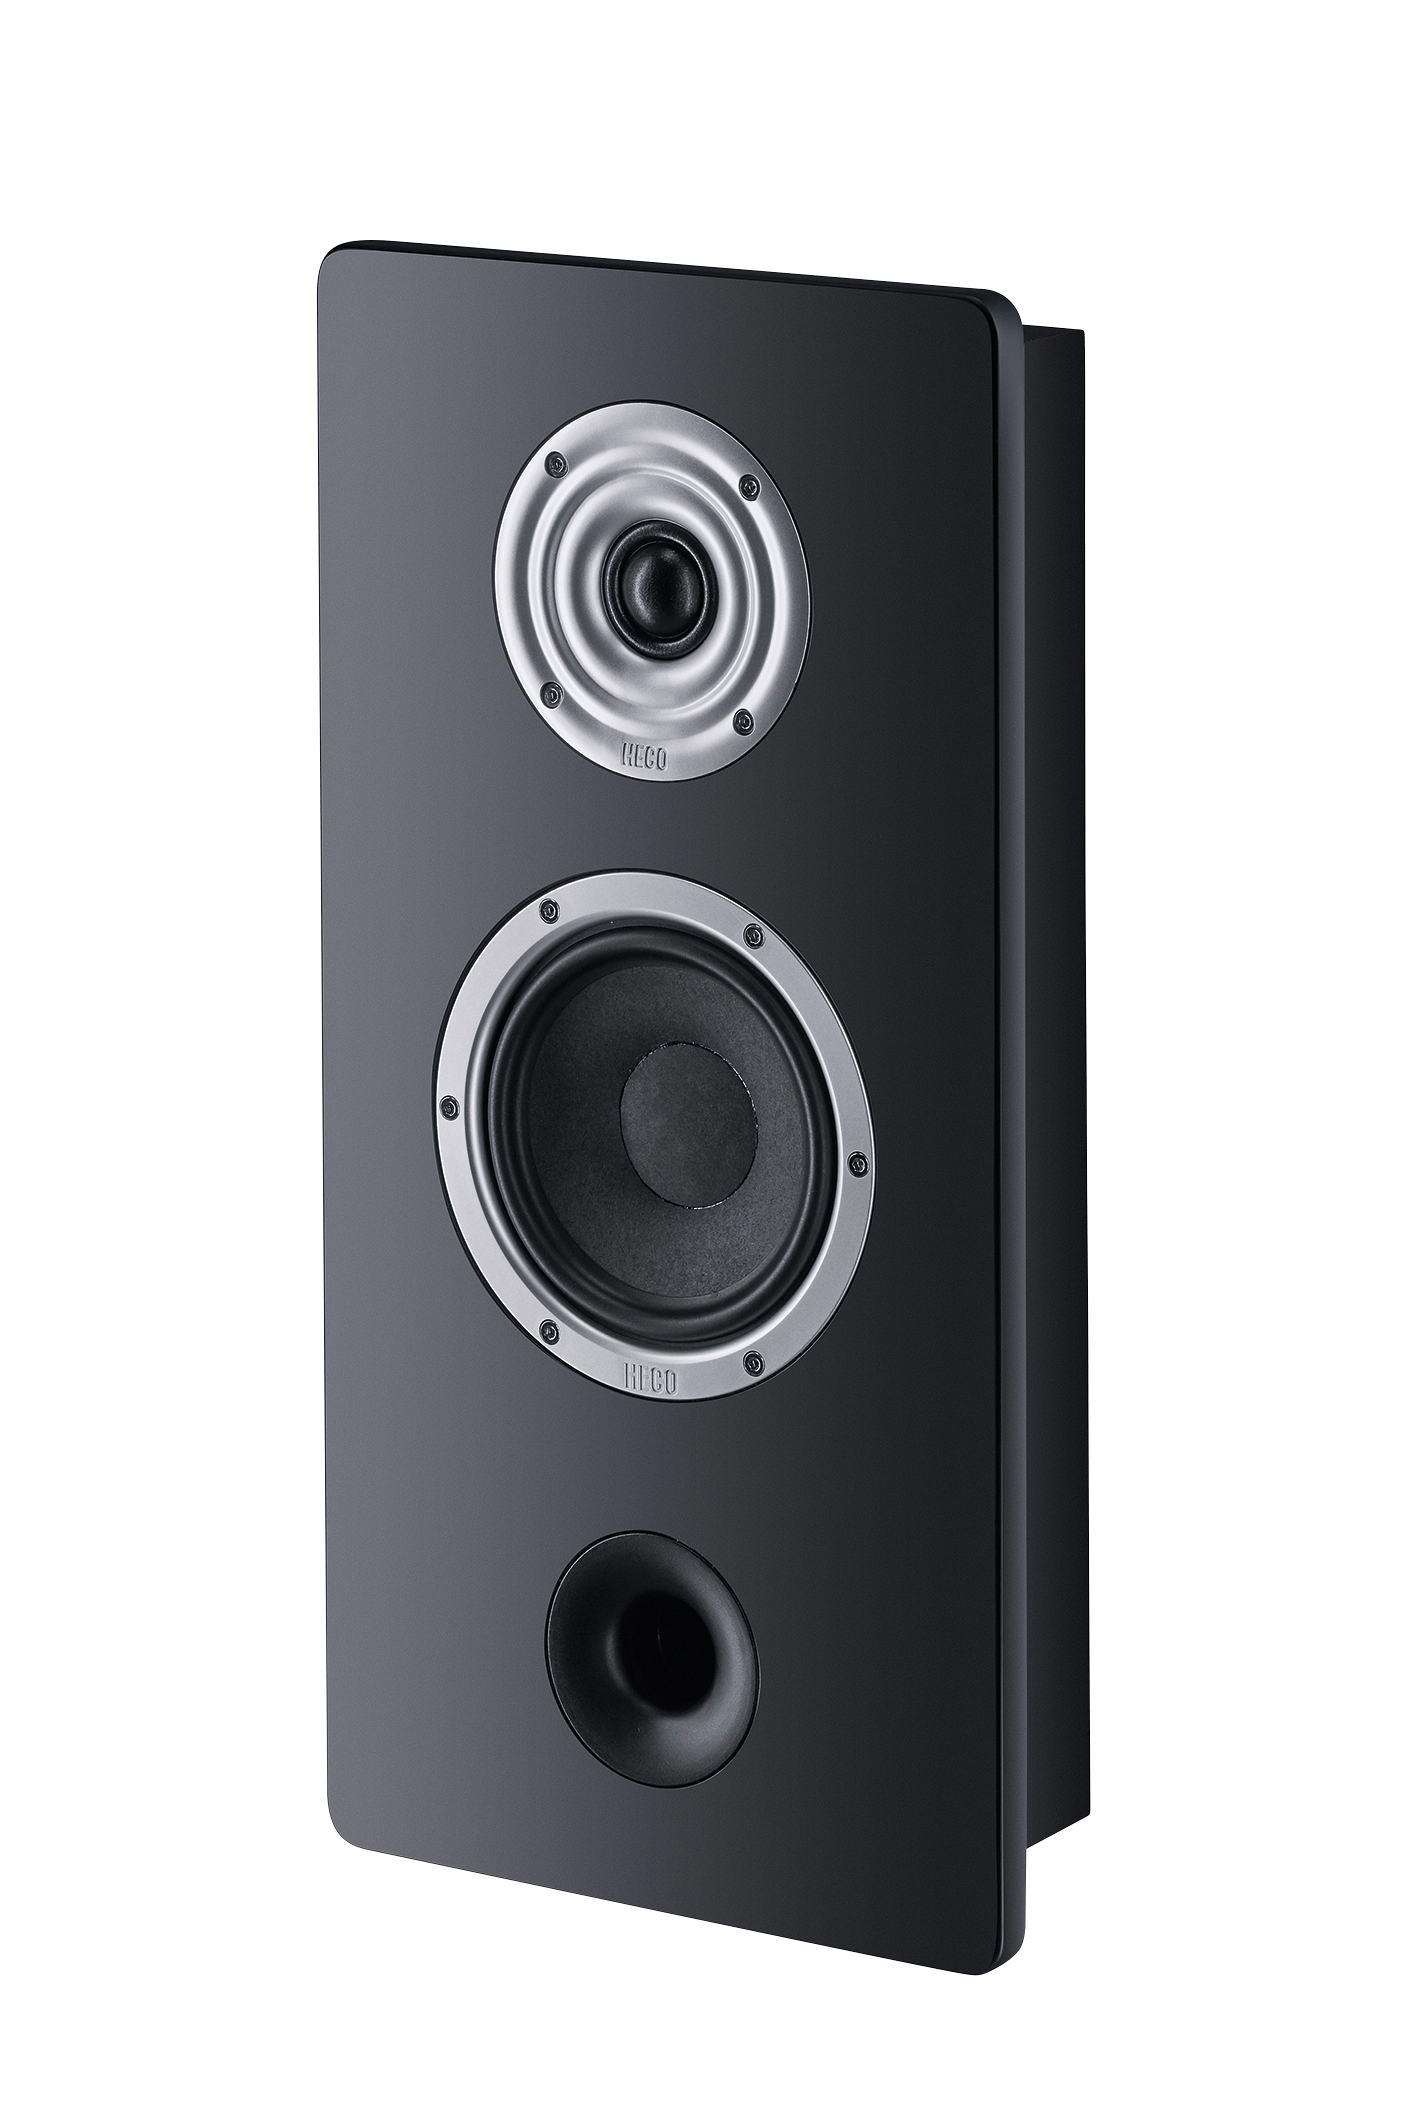 Ambient Line 22 F, wall-mounted speaker, universal on-wall speaker system expandable to a large home theater system